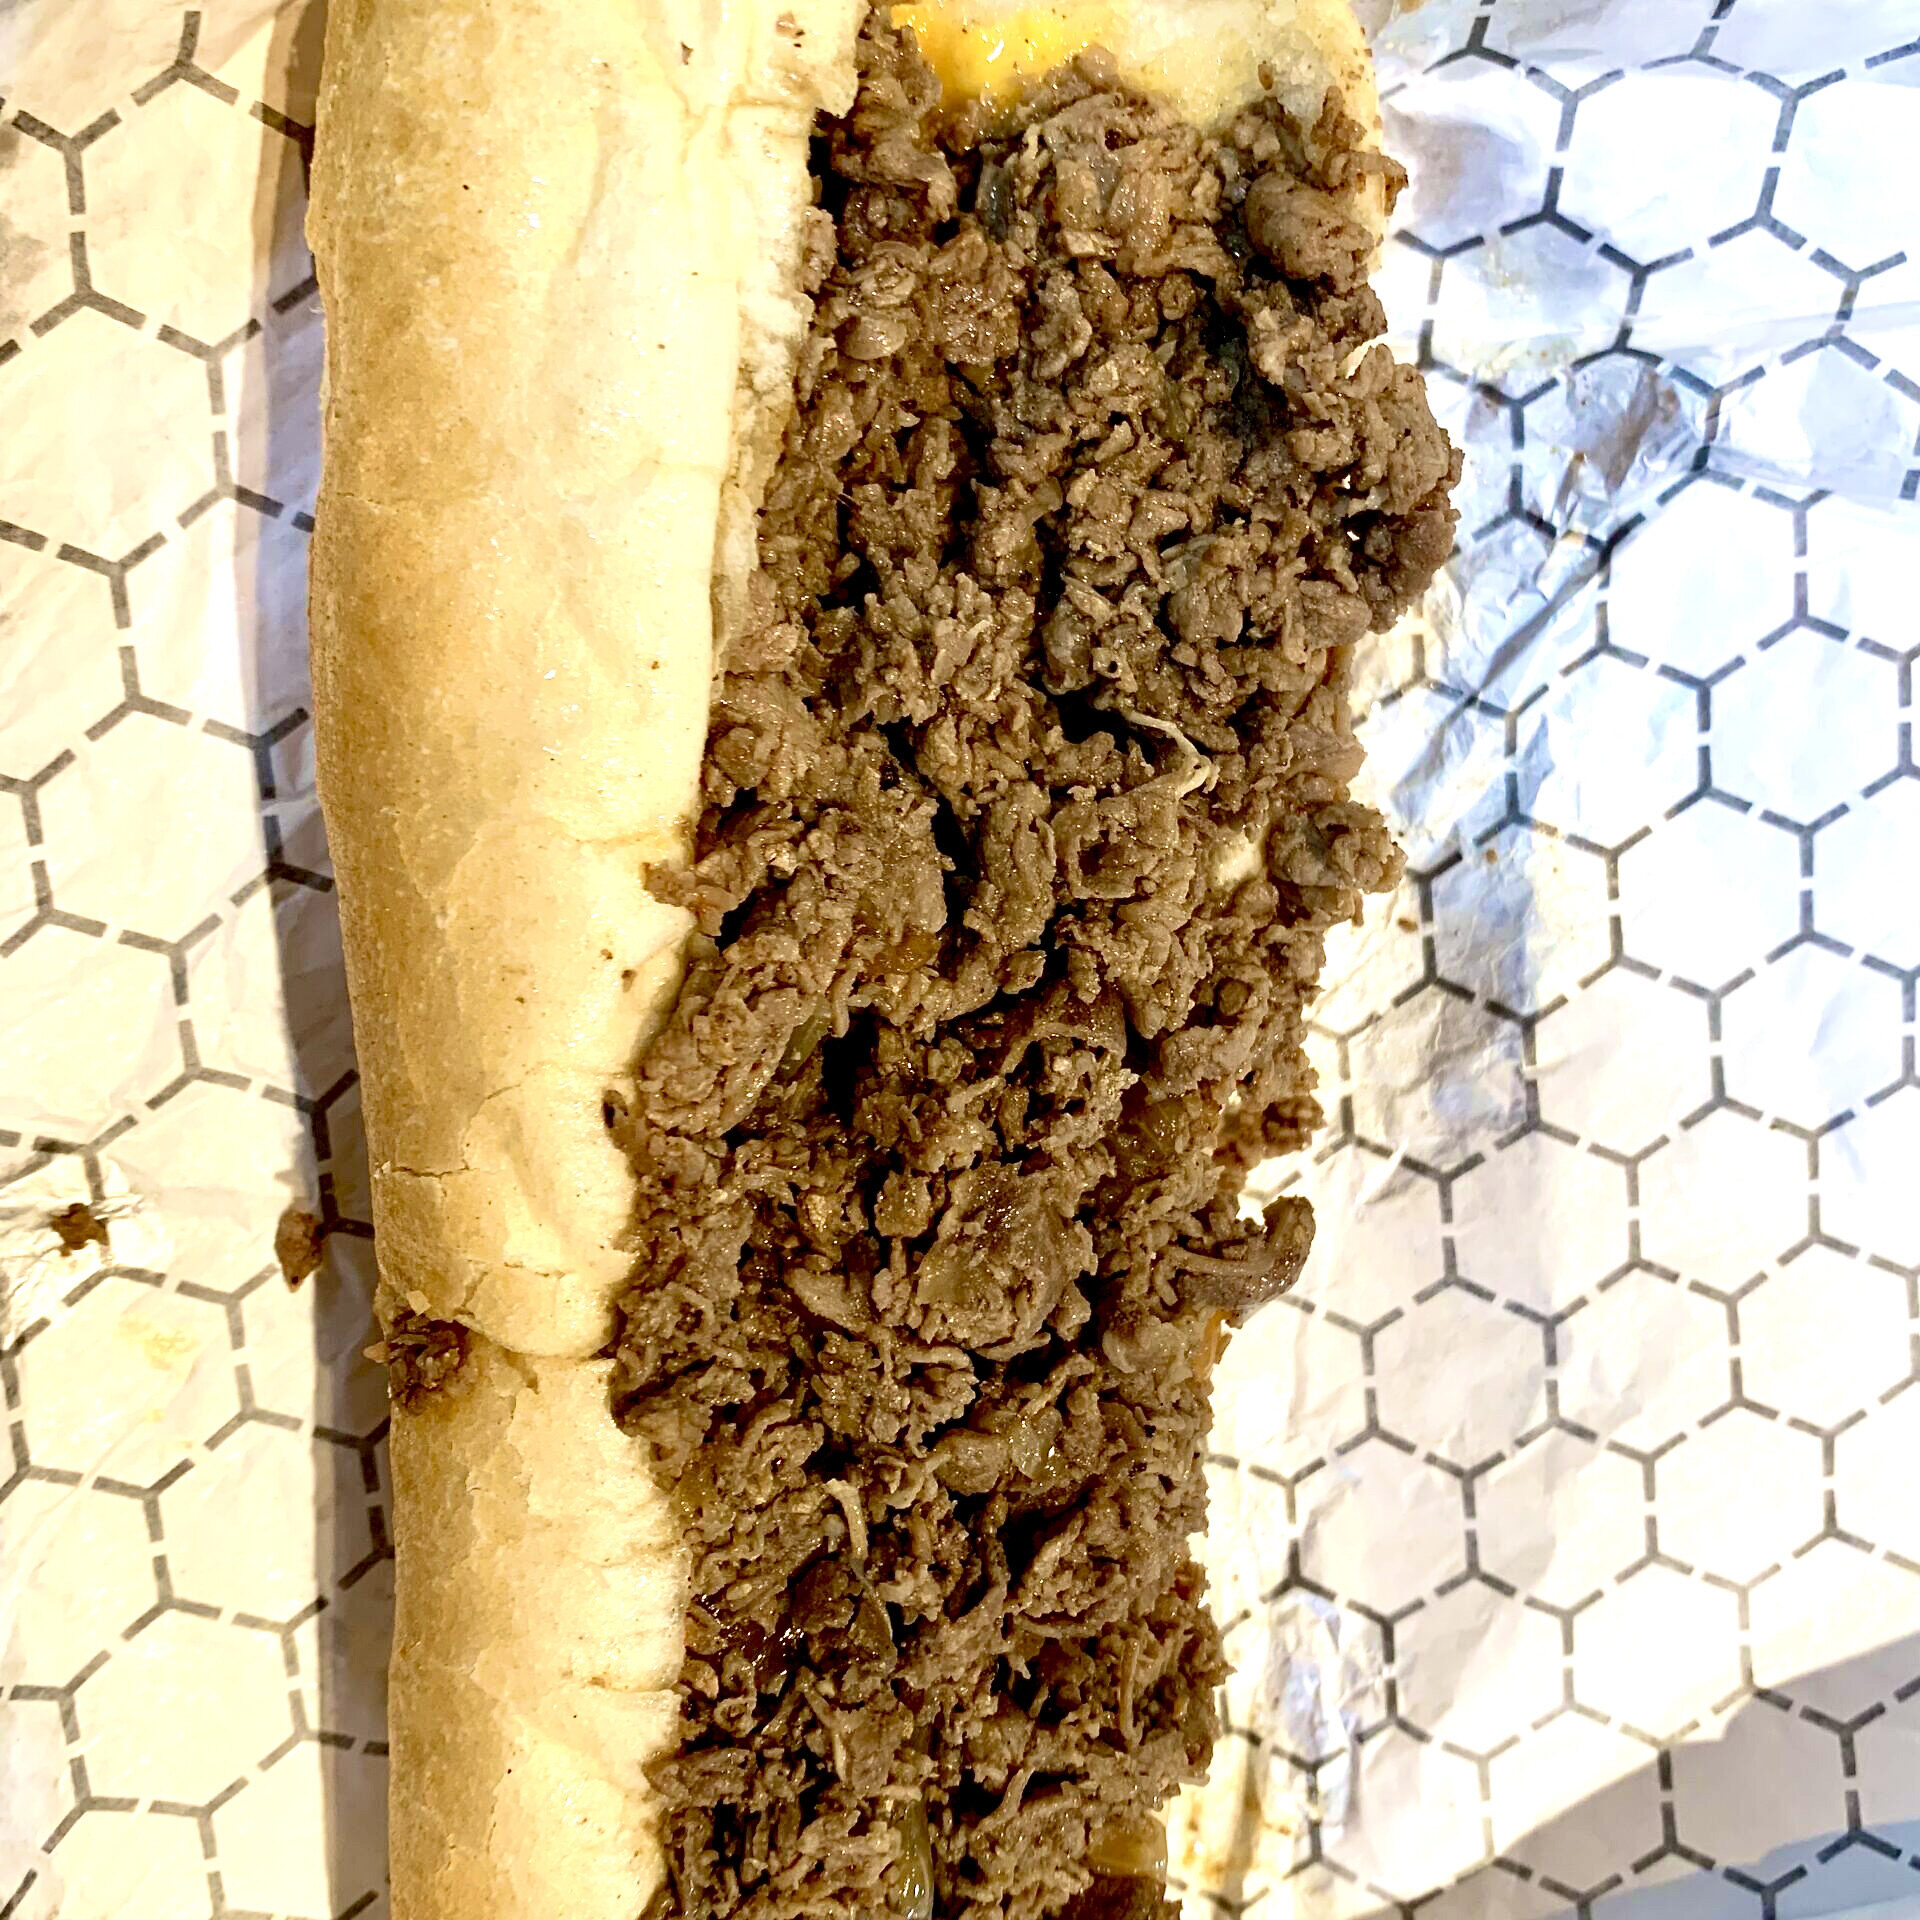 Cheesesteak-scaled-square-c95862f0cb88338148f0f3193cfc6b44-5ee0d2d5261d5 2